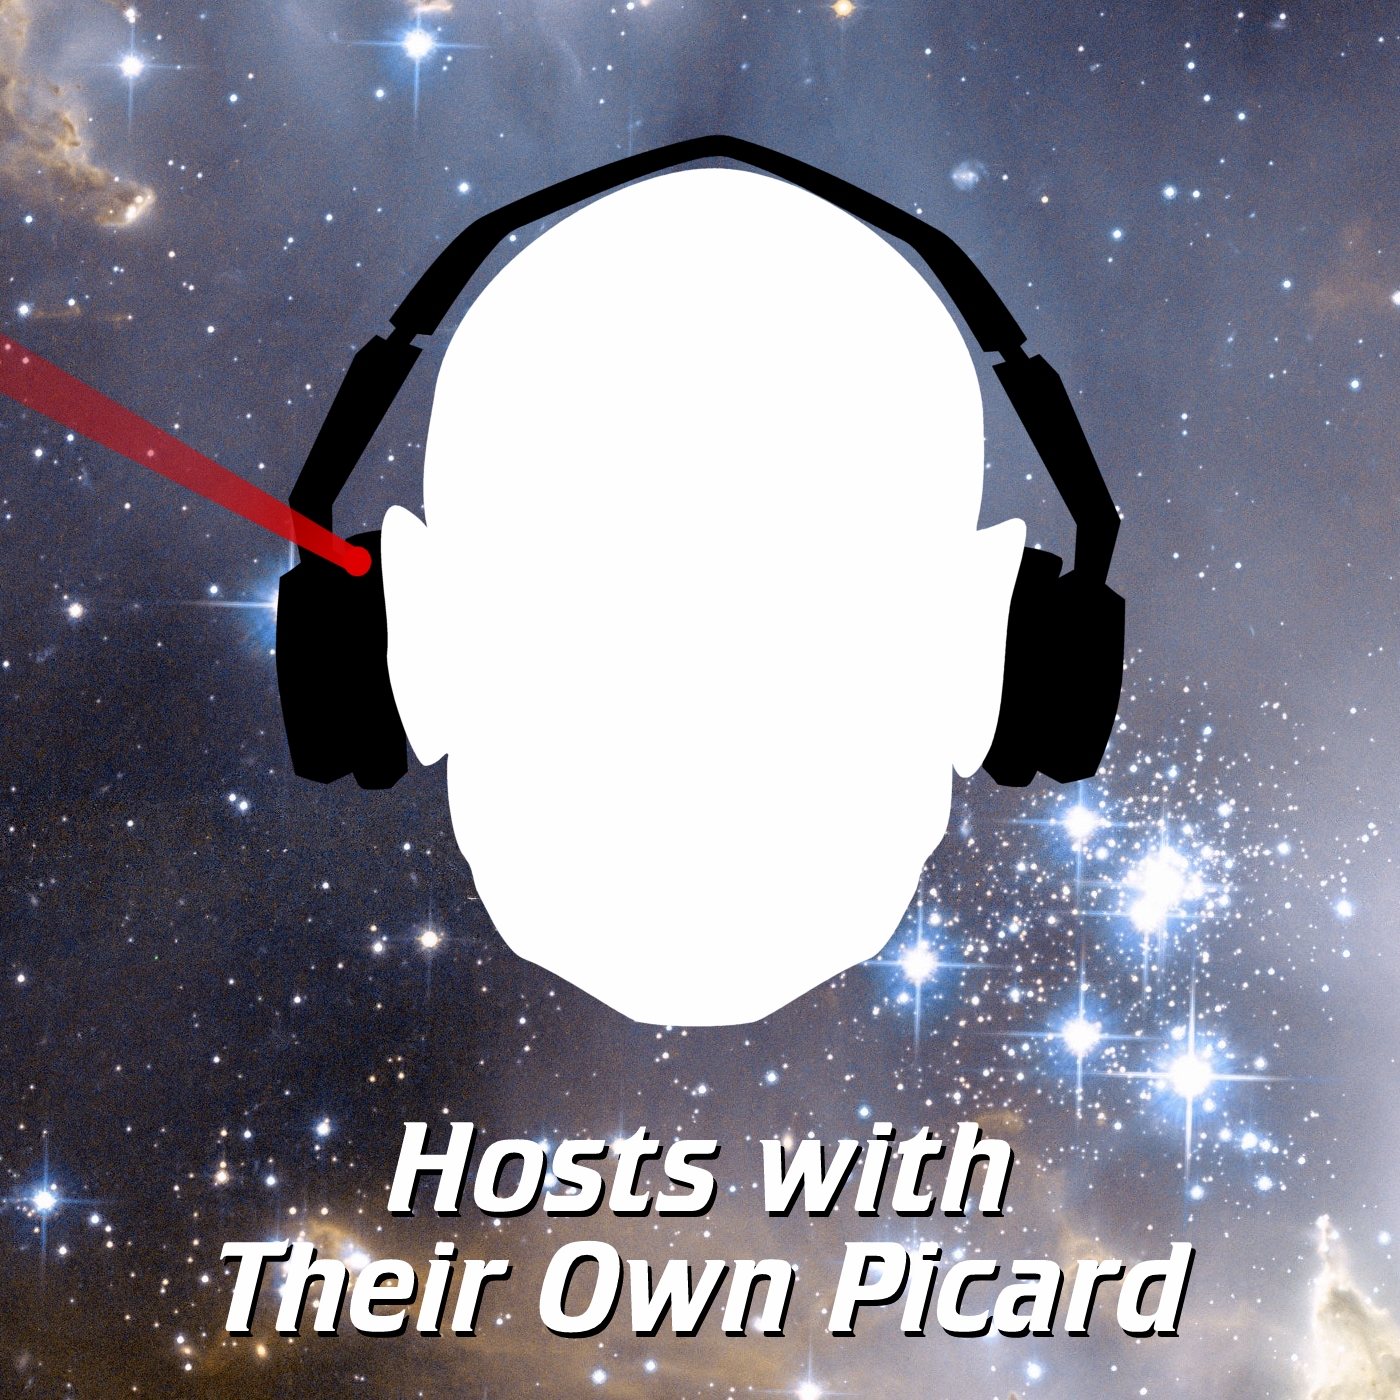 Hosts with Their Own Picard Podcast Episode 02 – Star Trek: Picard Full Trailer #1